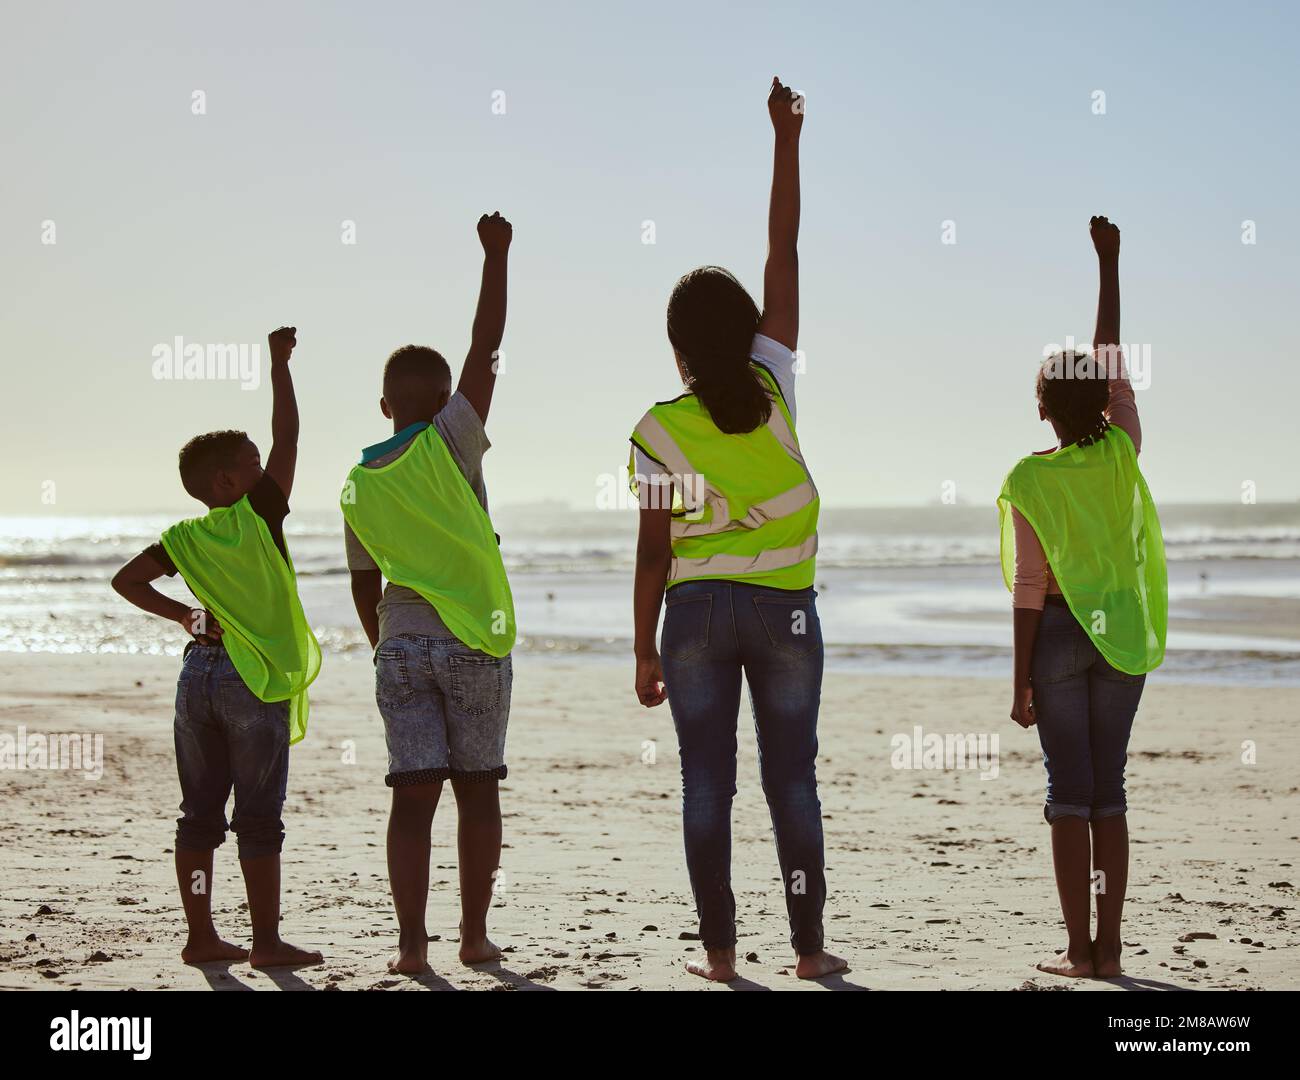 Back, activist and volunteer with friends on the beach for the conservation of the environment or sustainability. Charity, motivation and teamwork Stock Photo